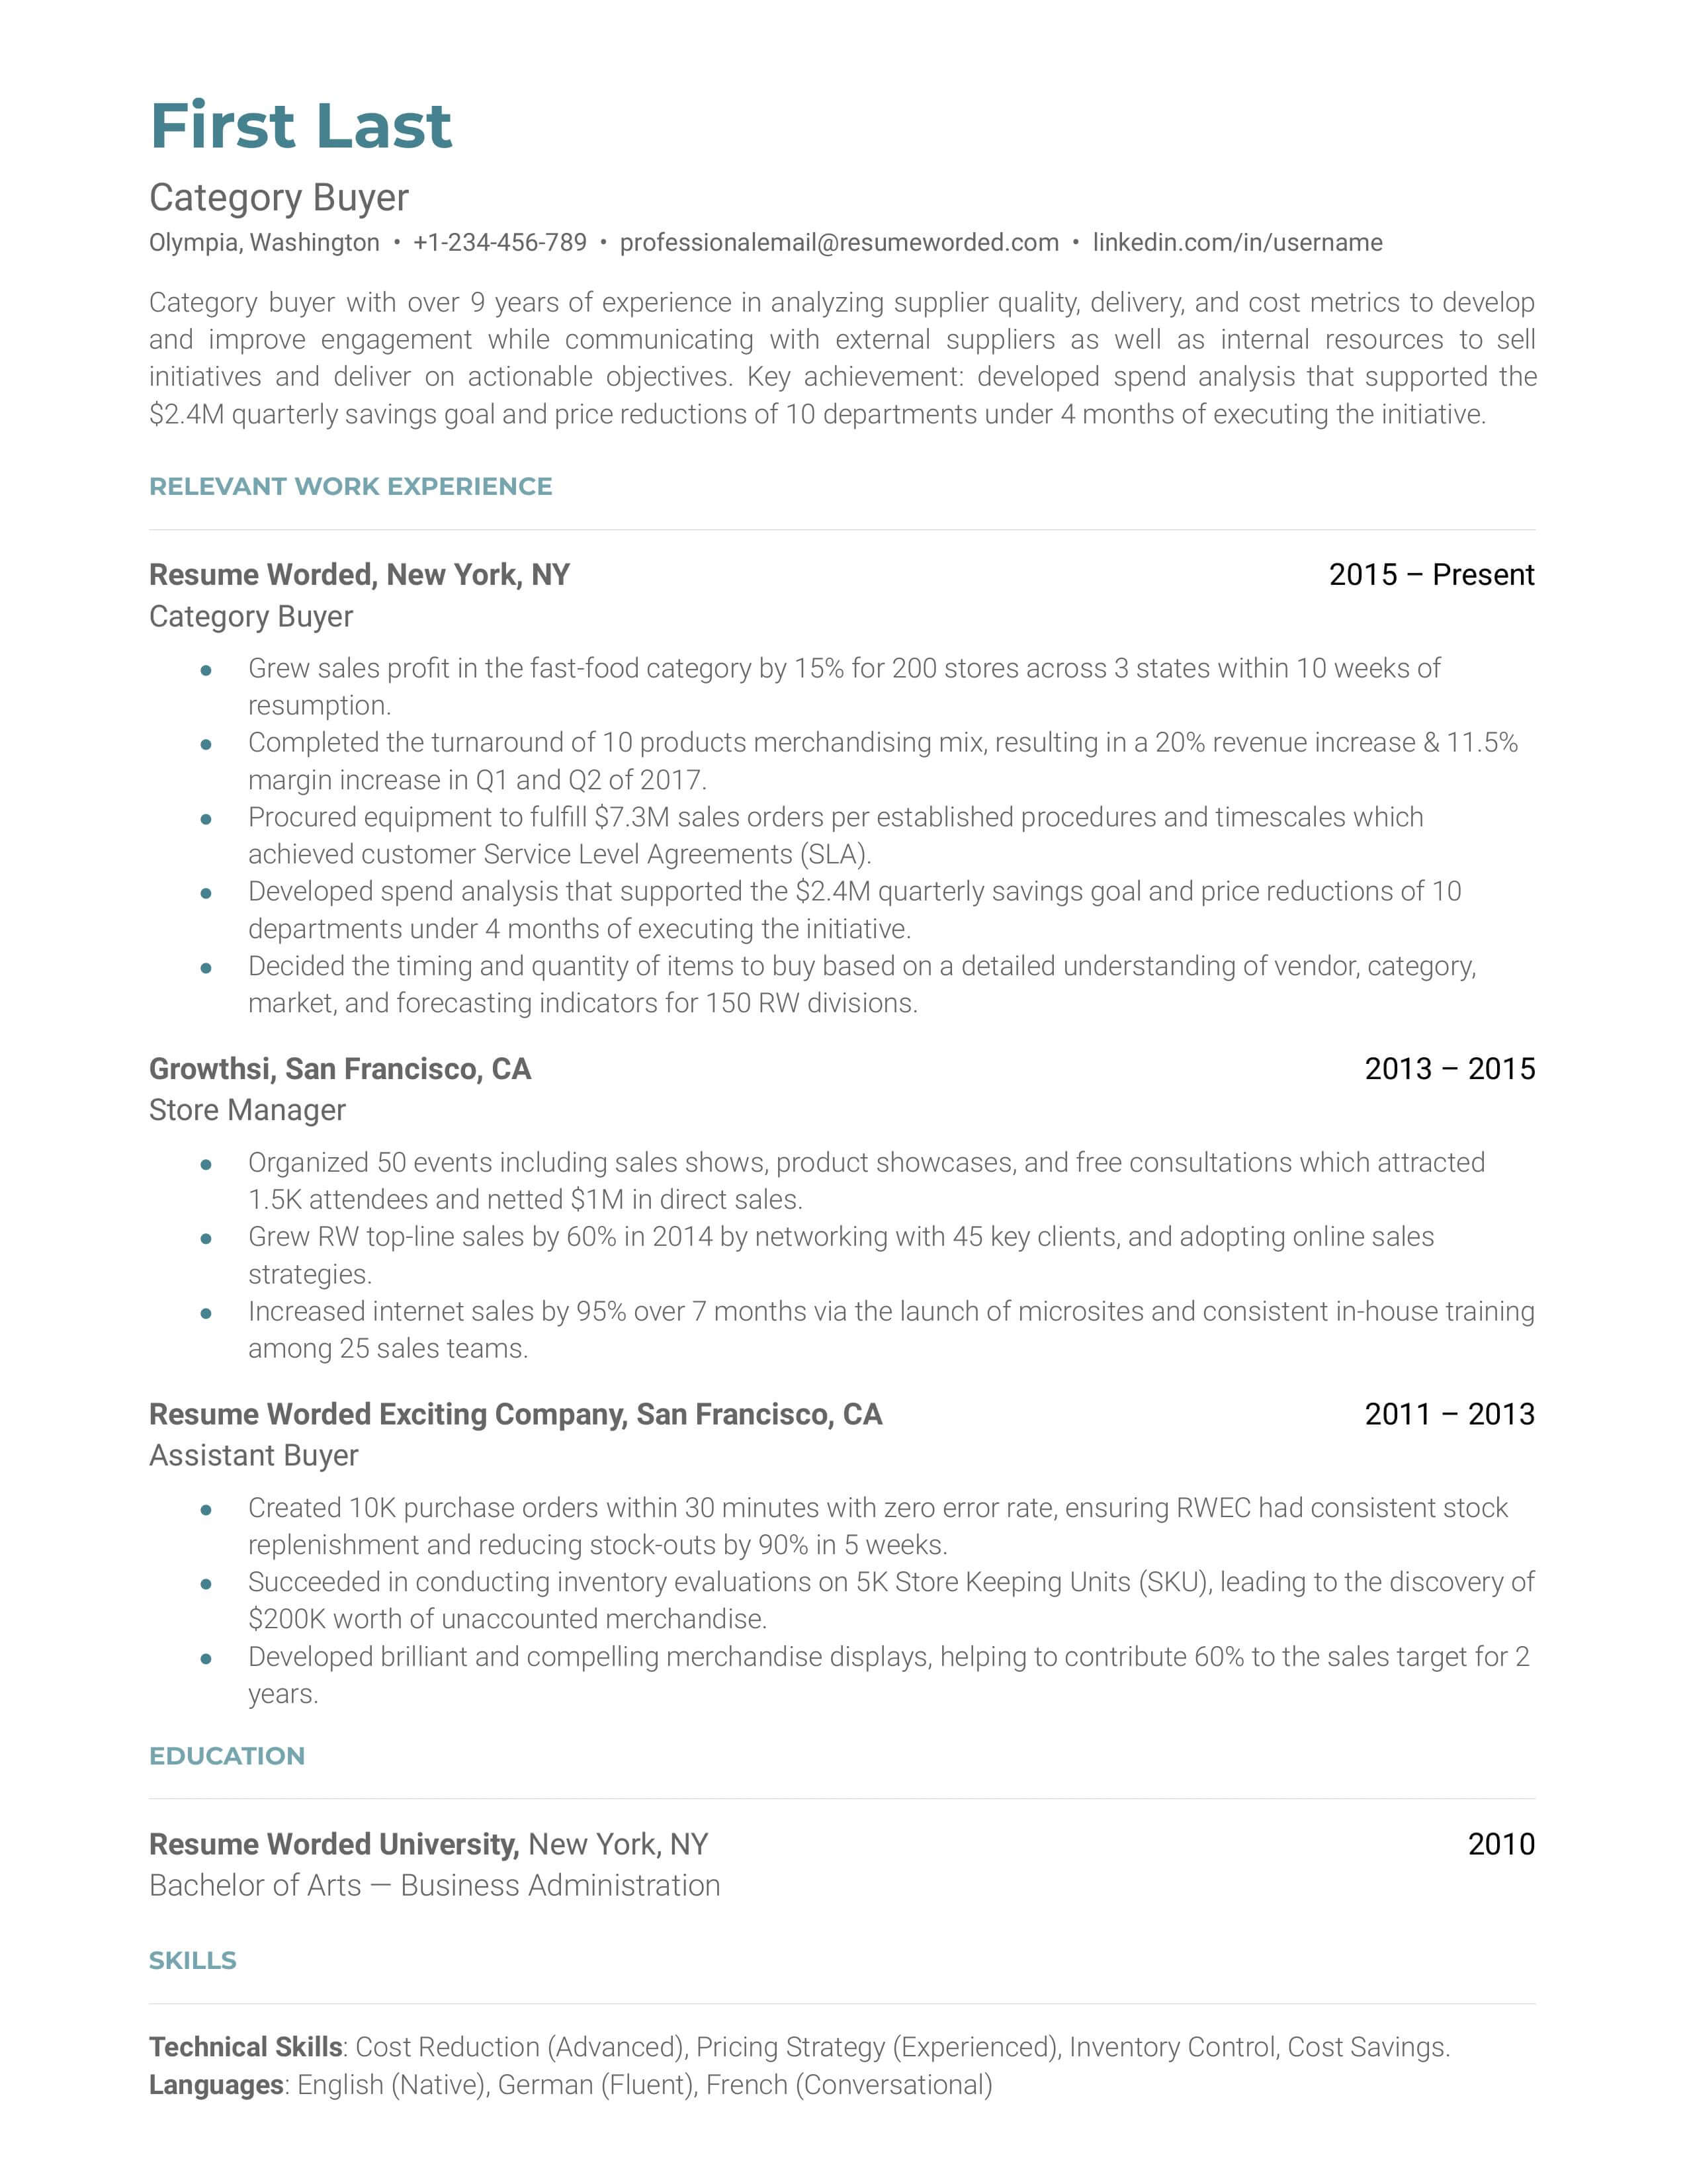 A category buyer resume template that highlights relevant work experience